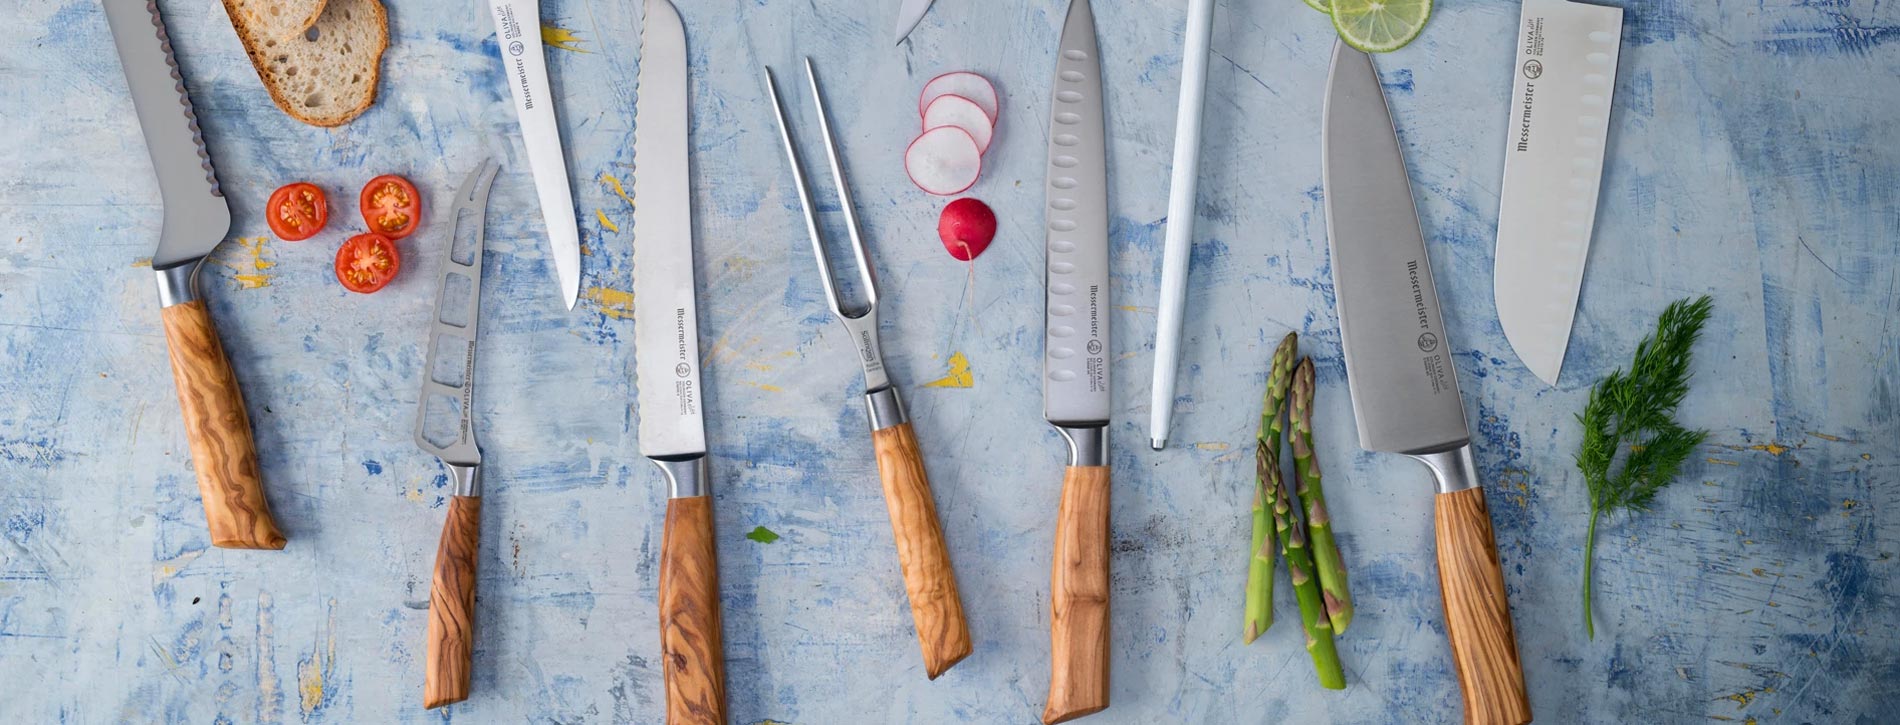 The Top Knives Used by Professional Chefs